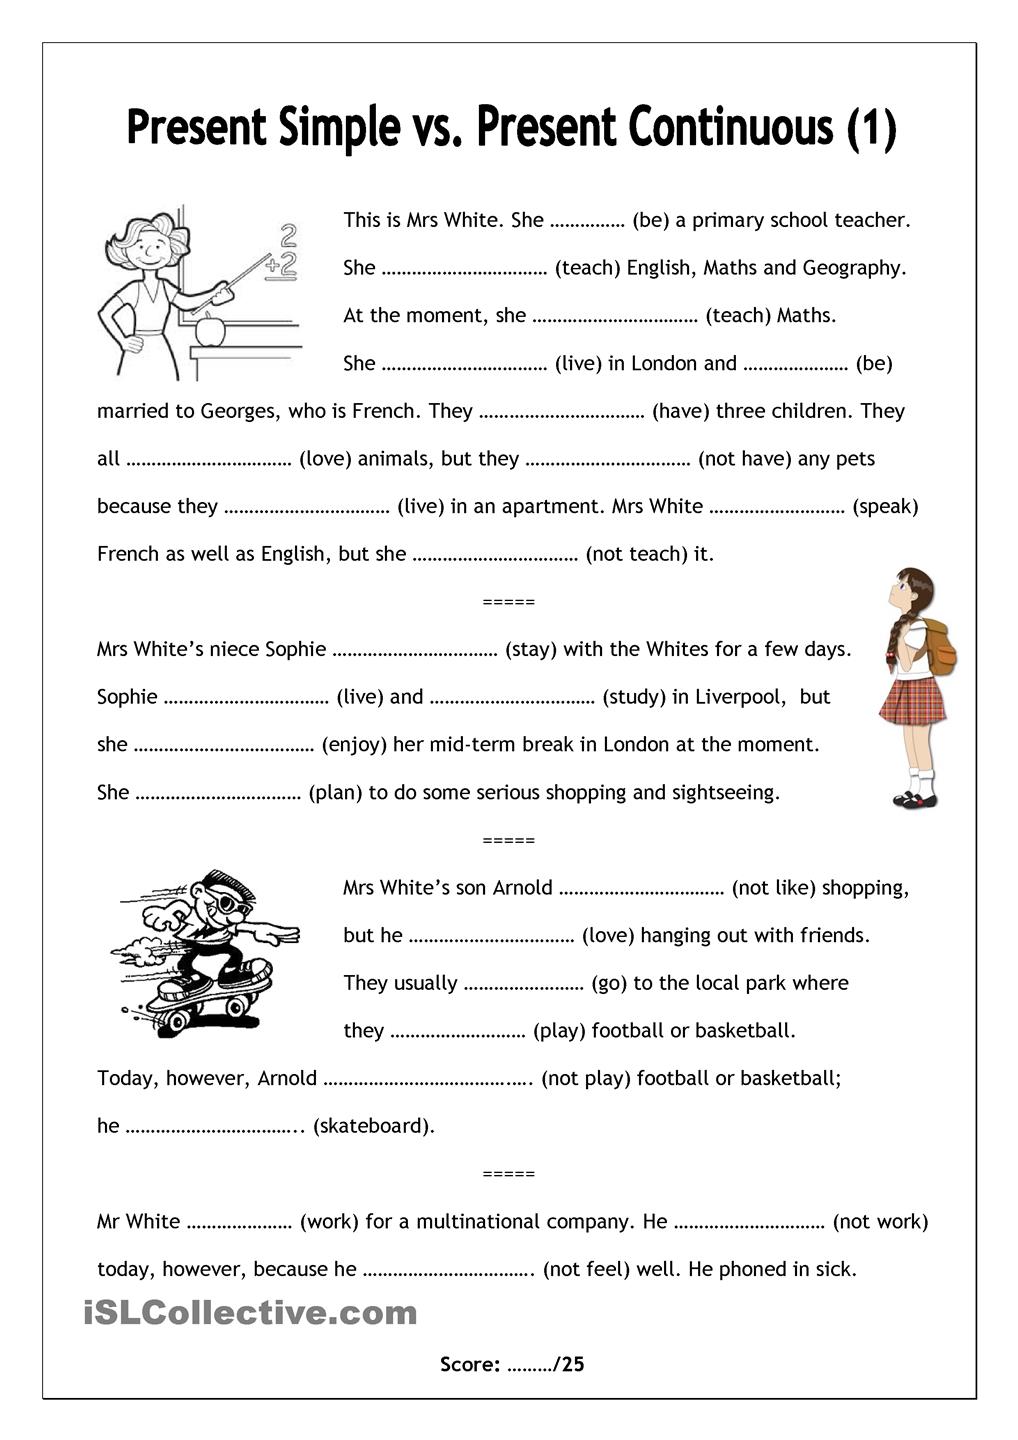 Present Continuous Worksheet Image